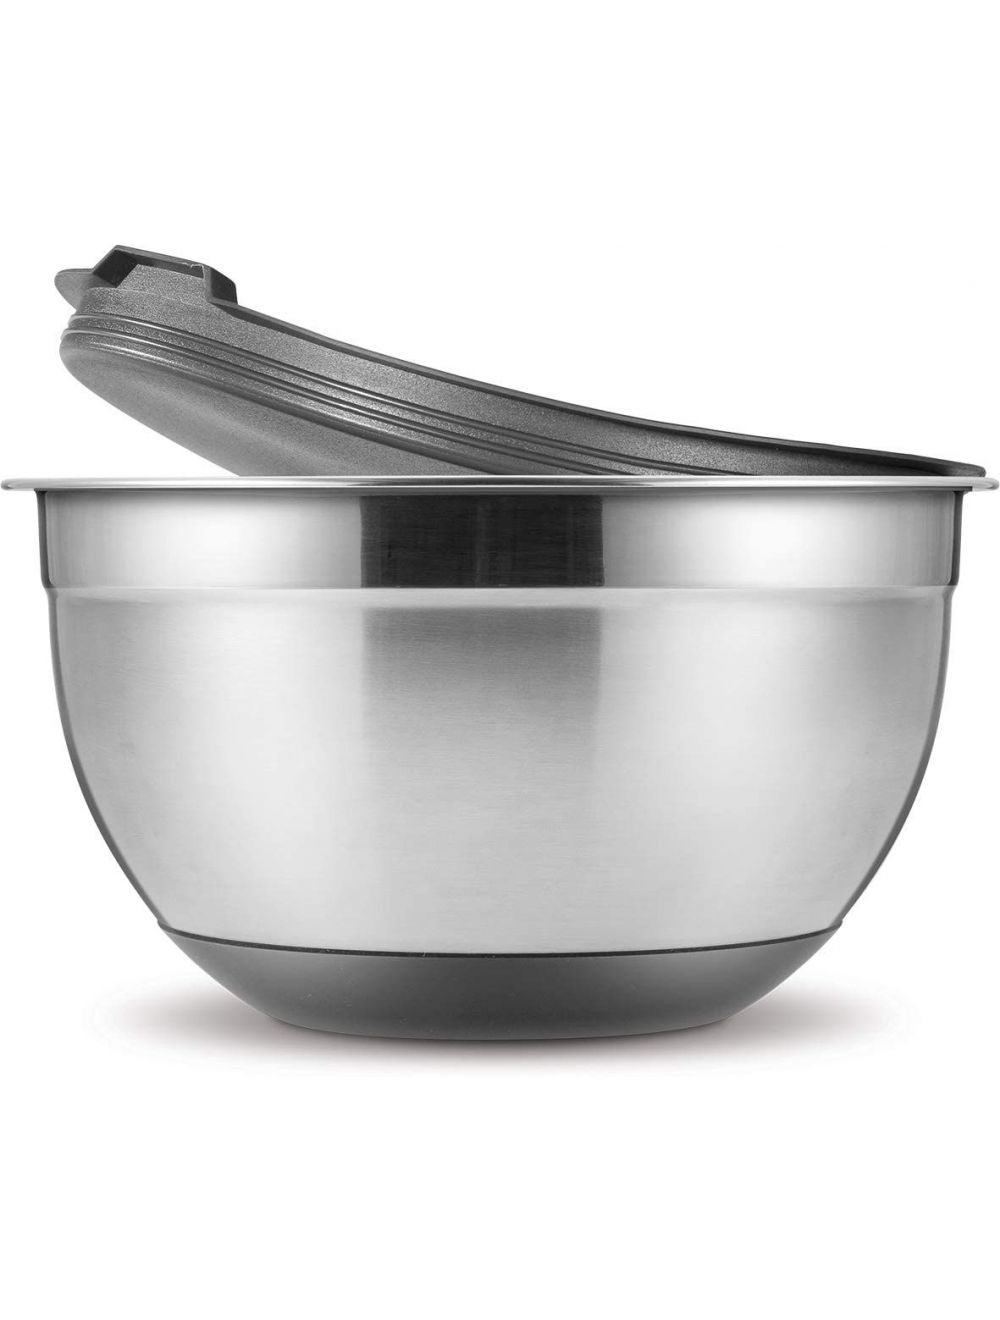 Tescoma Grandchef Bowl With Lid 20 cm